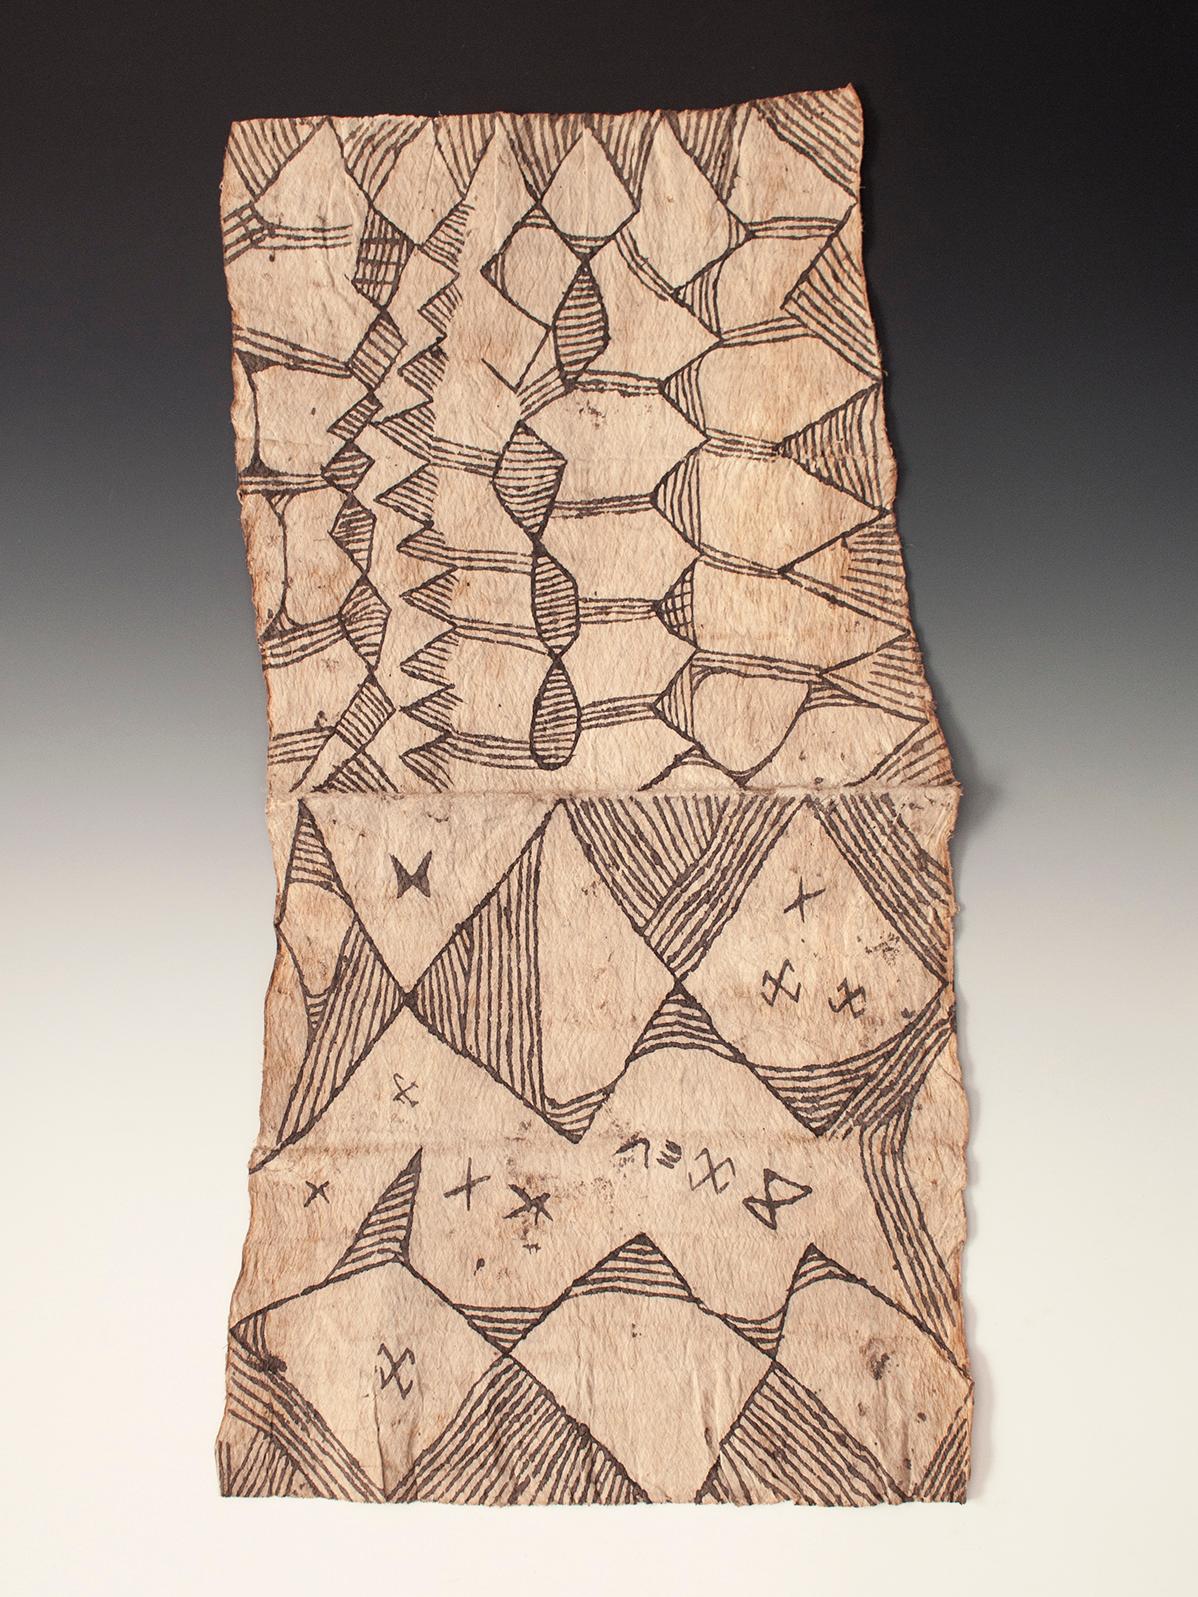 20th Century bark cloth painting, Mbuti (Efe) people, Ituri Forest, D. R. Congo

A painted barkcloth from the Efe people in the Ituri forest of northeastern Democratic Republic of the Congo. These were made from the inner bark of trees, pounded and